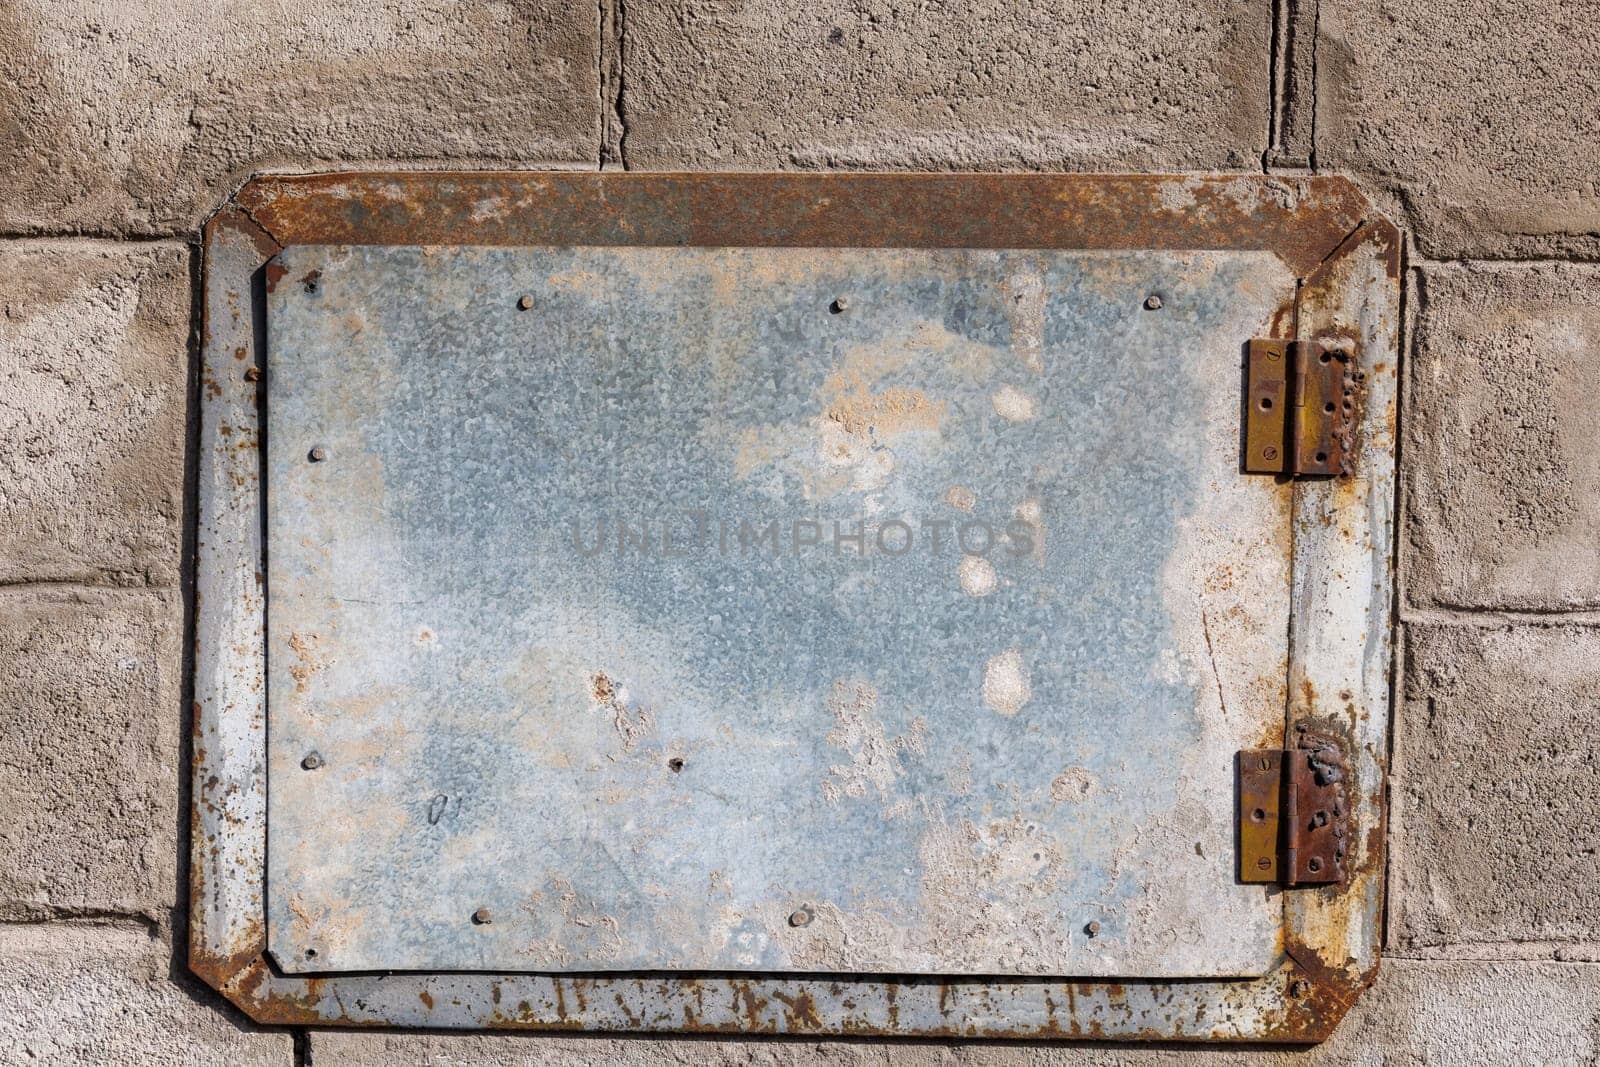 A small rectangular zinc coated metal hatch mounted on a brick wall, flat texture and background